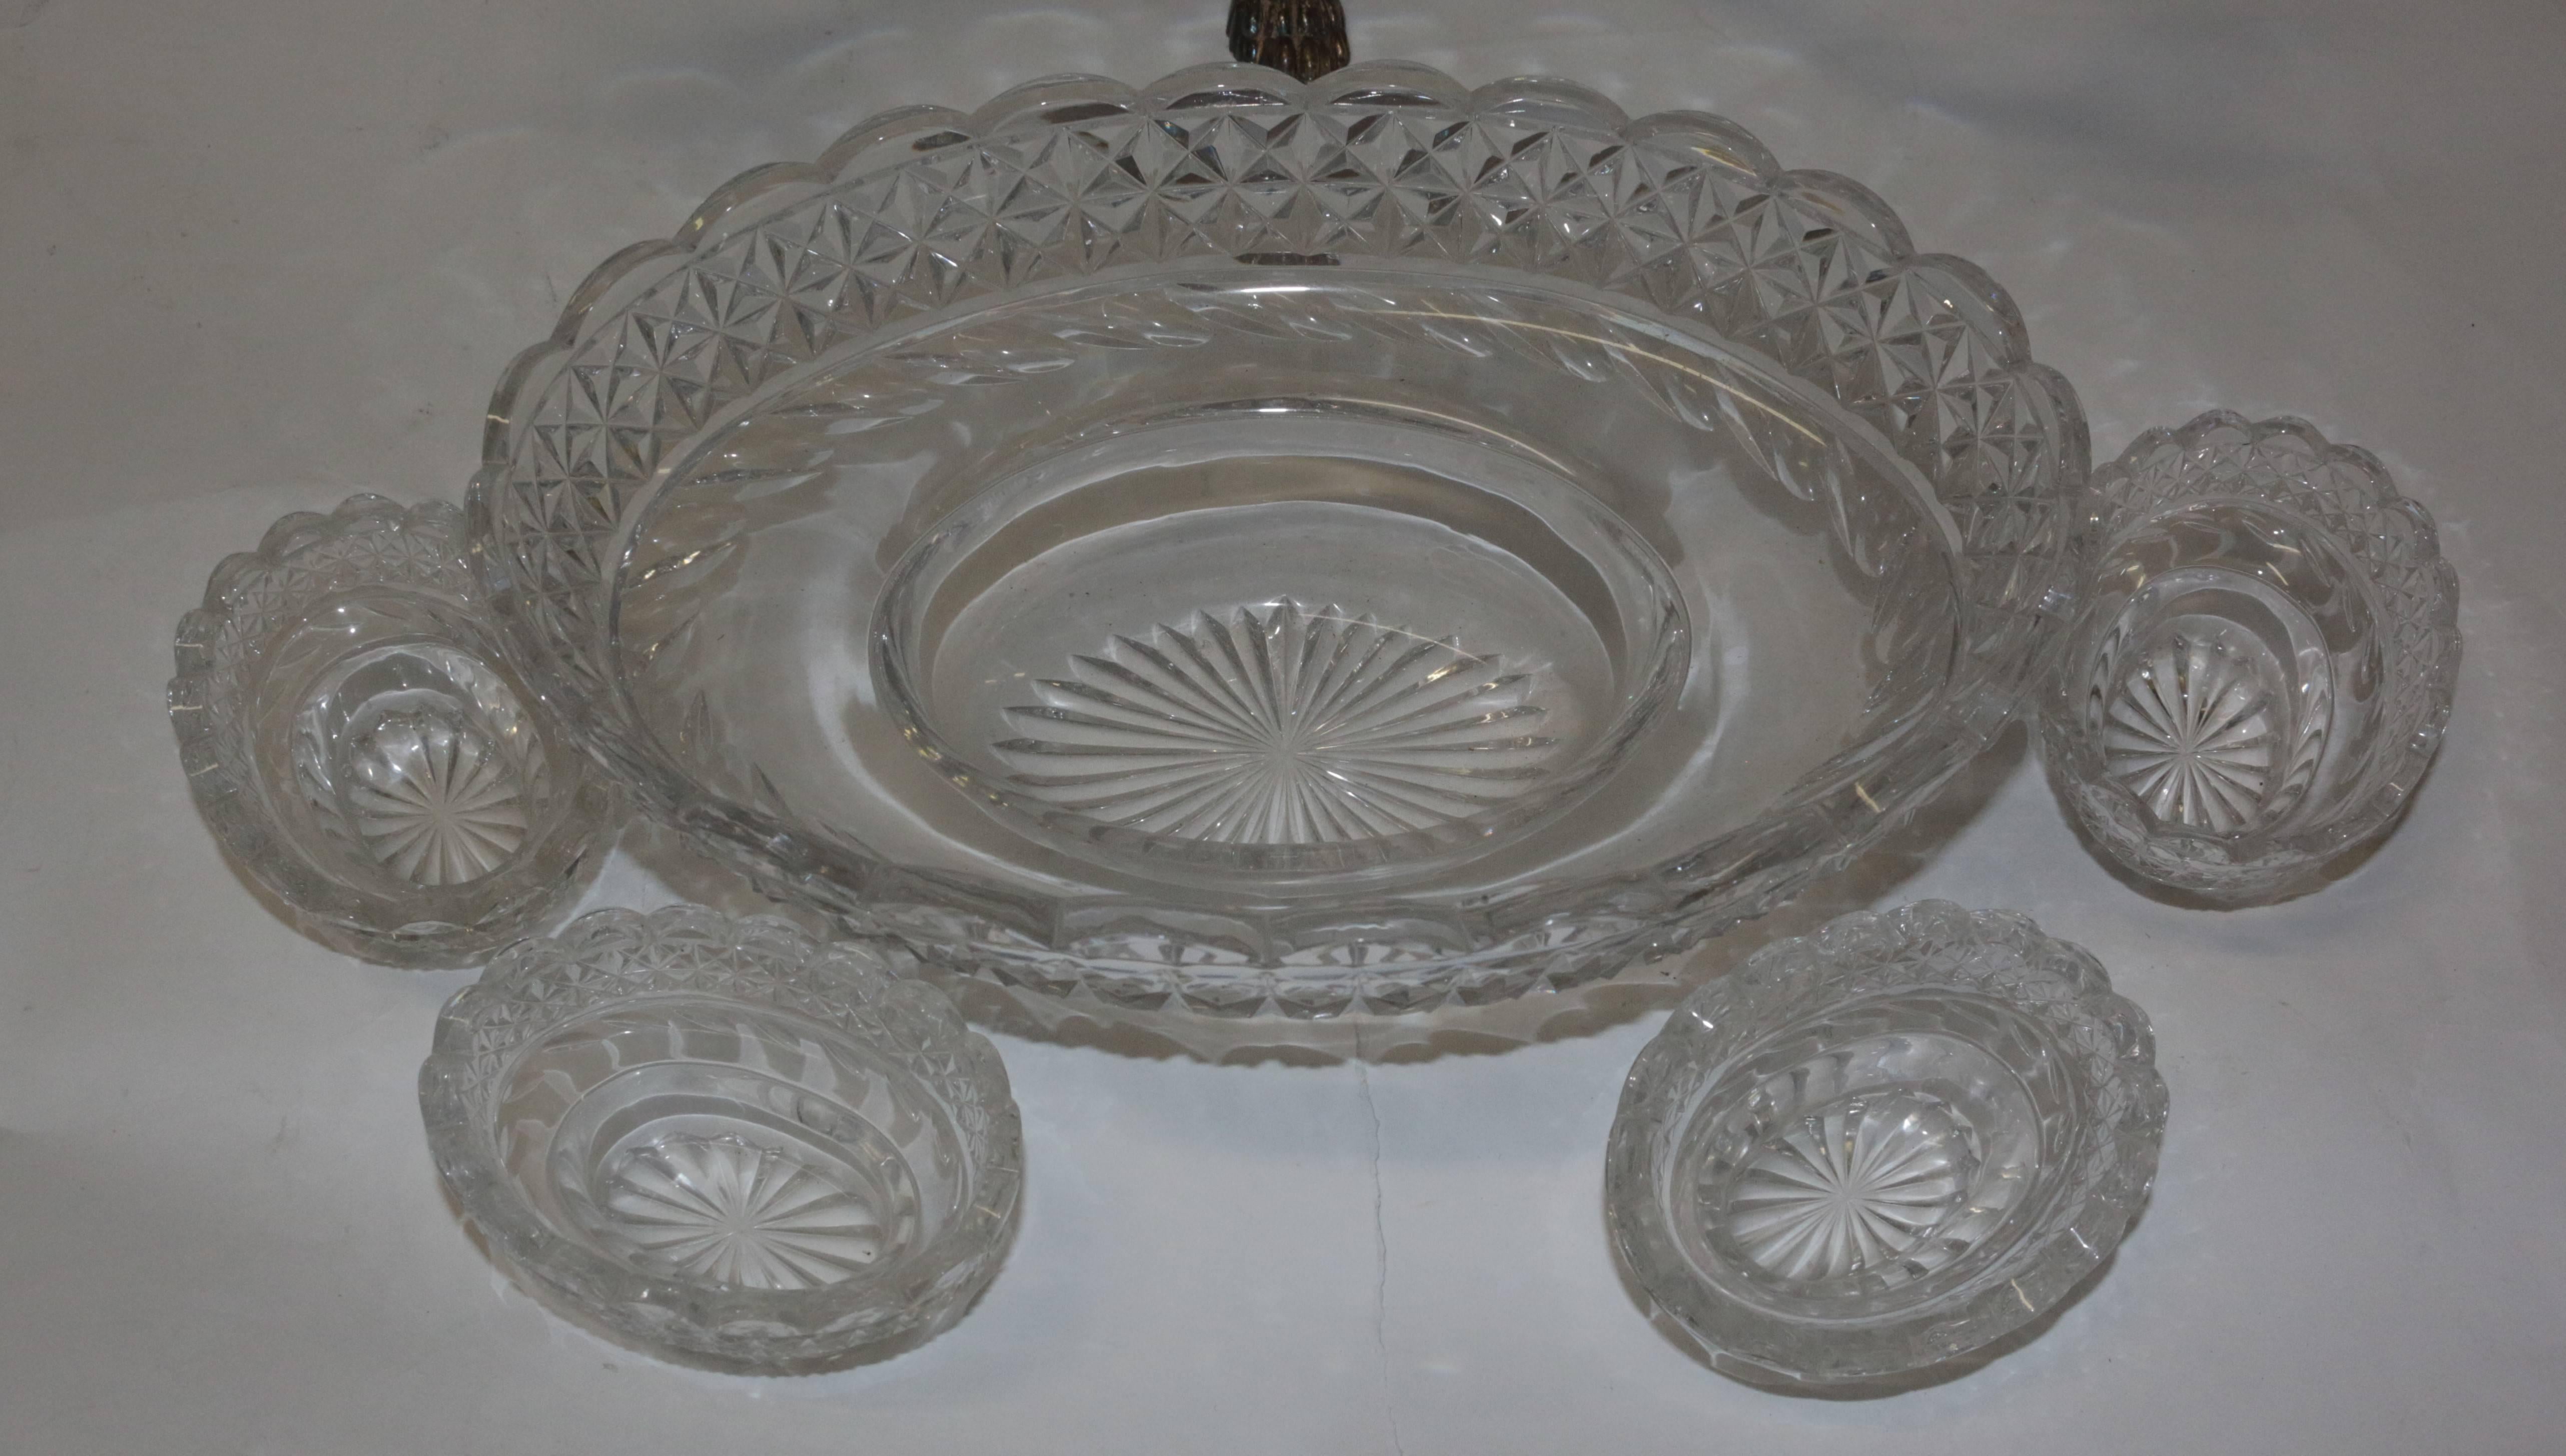 19th Century Silver Plated Centrepiece with Four Arms in Bohemian Cut Crystal